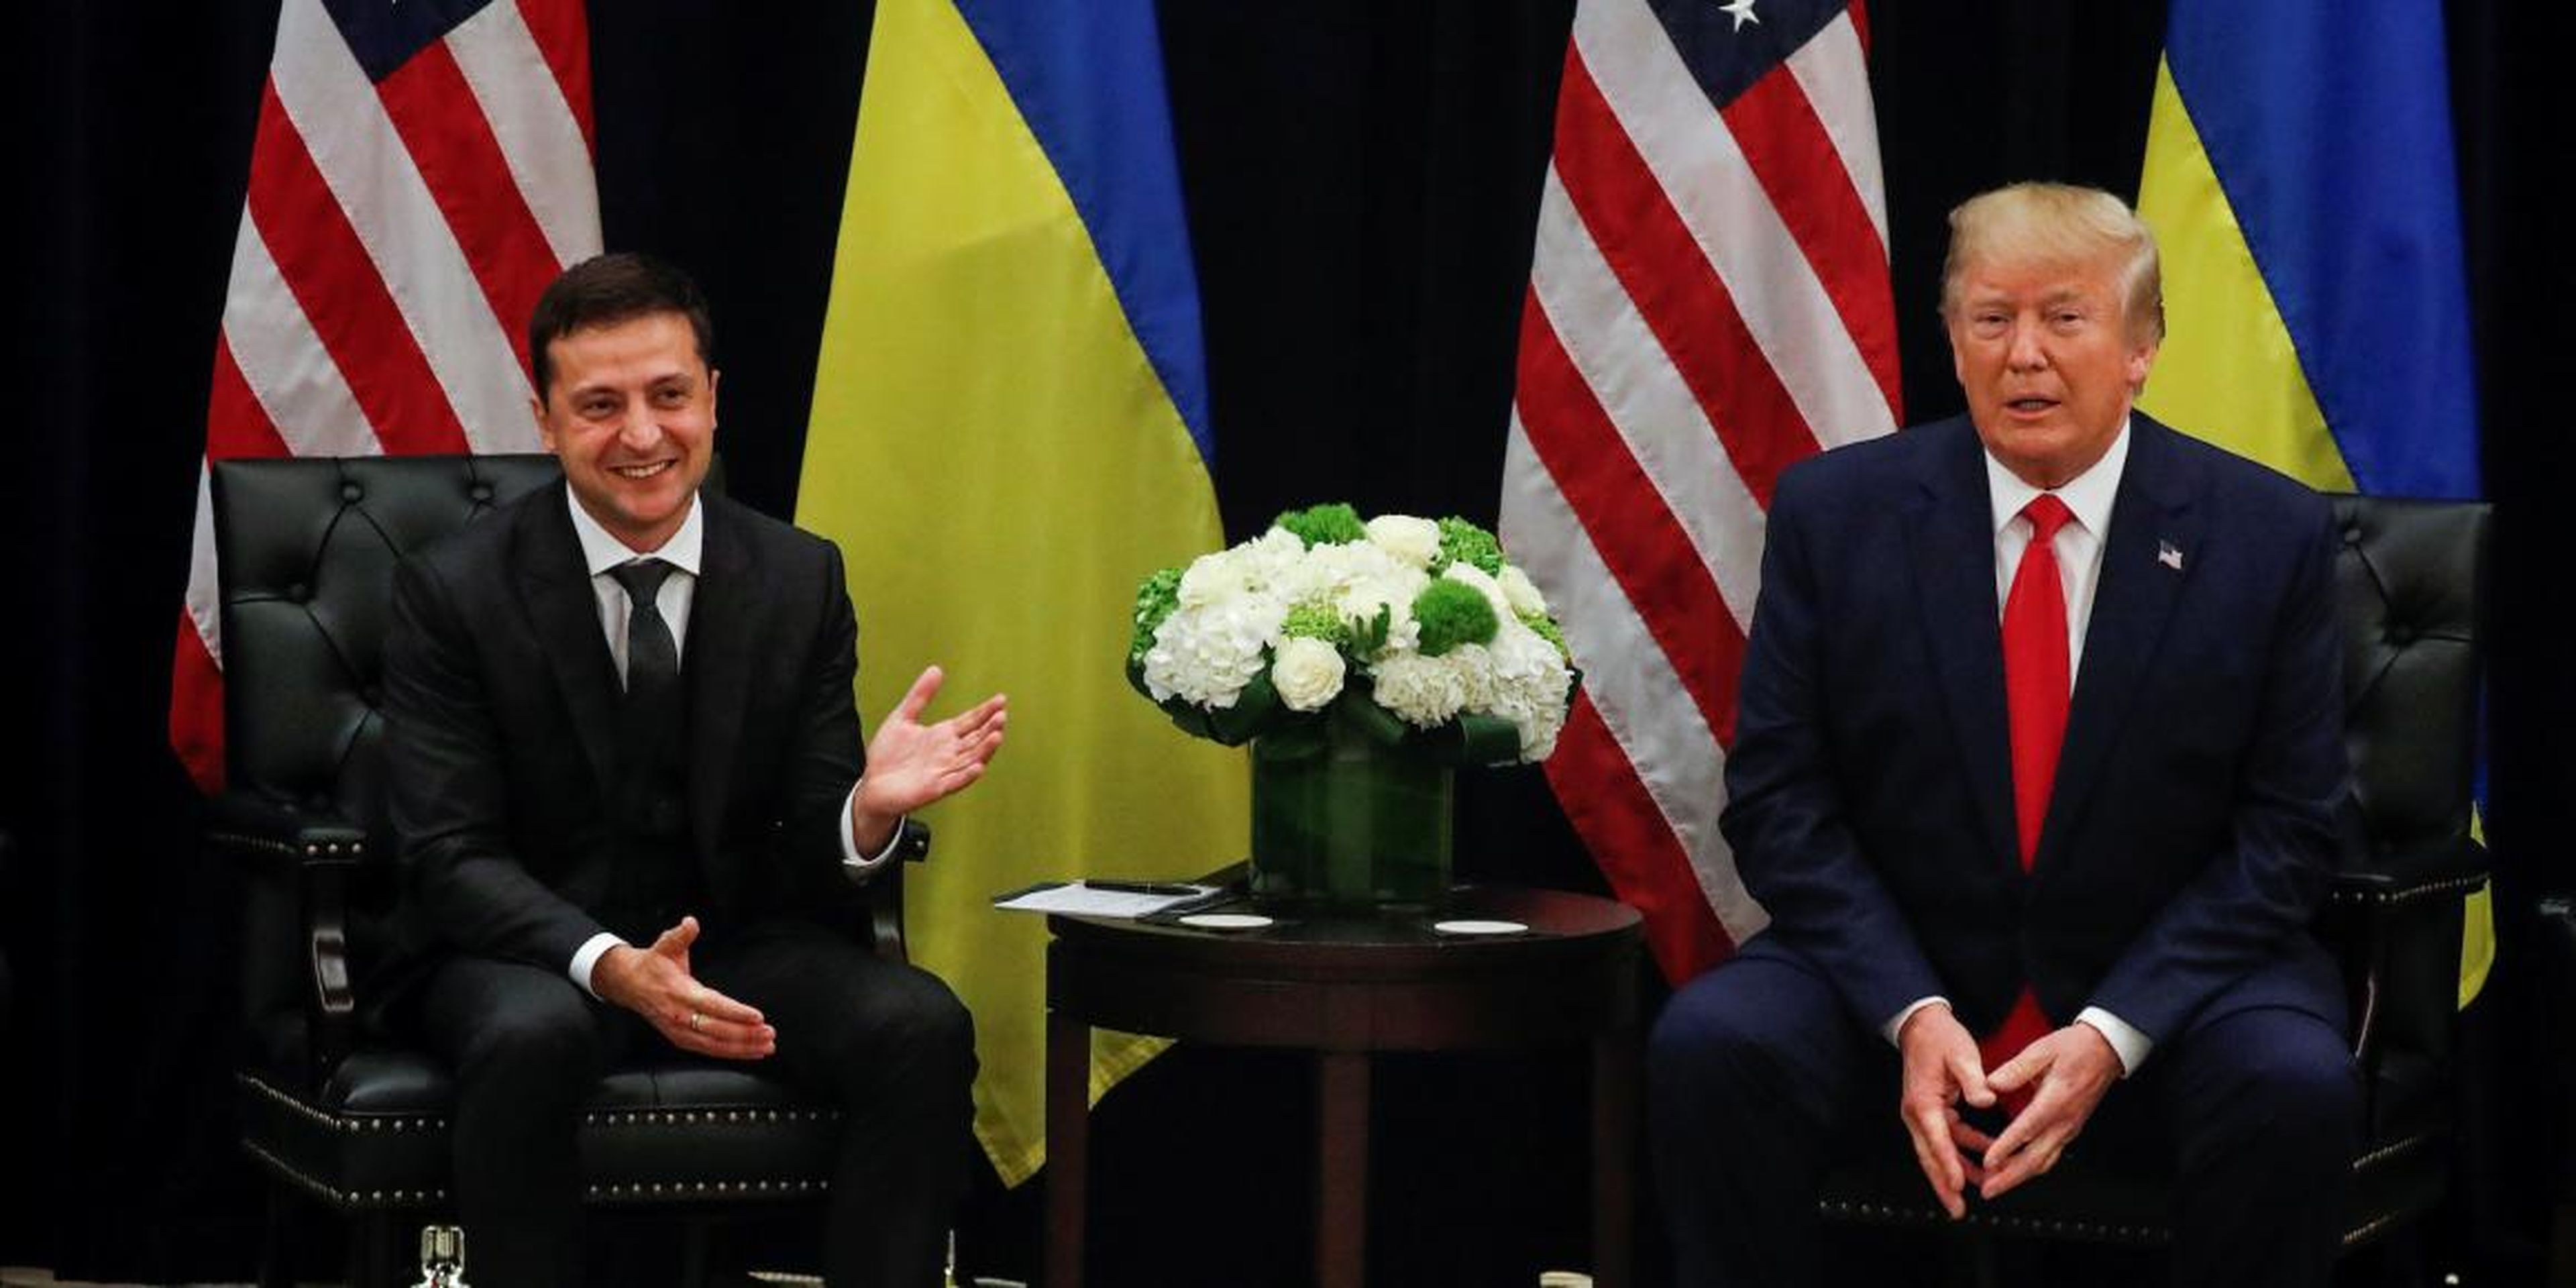 Trump and Ukrainian President Volodymyr Zelensky on the sidelines of the United Nations General Assembly in September.